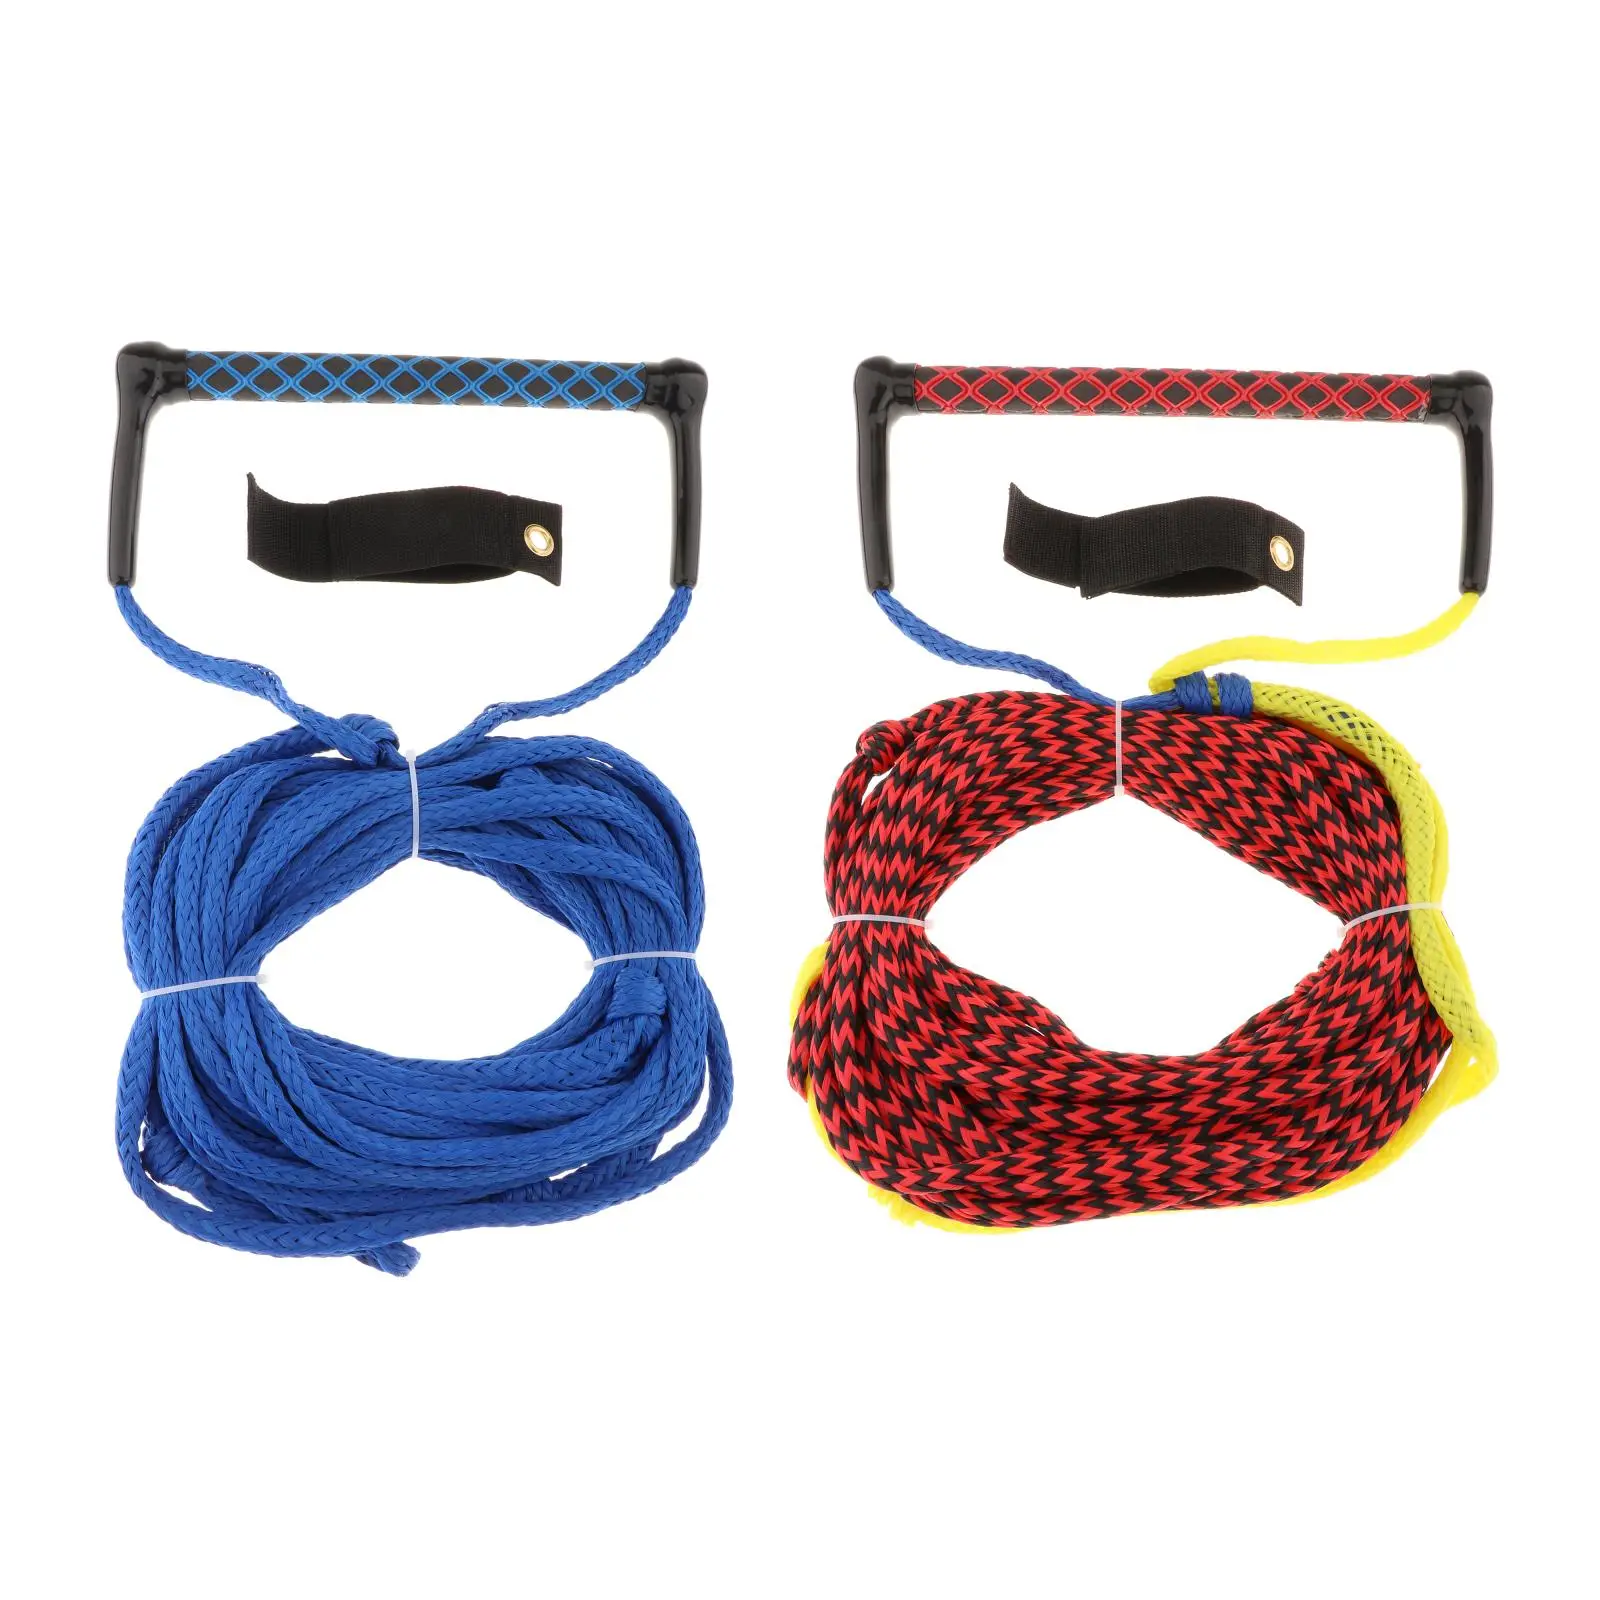 23m Ski Rope Tow Harness with Grip Handle for Wakeboarding, Speedboats, and Wakesurfing